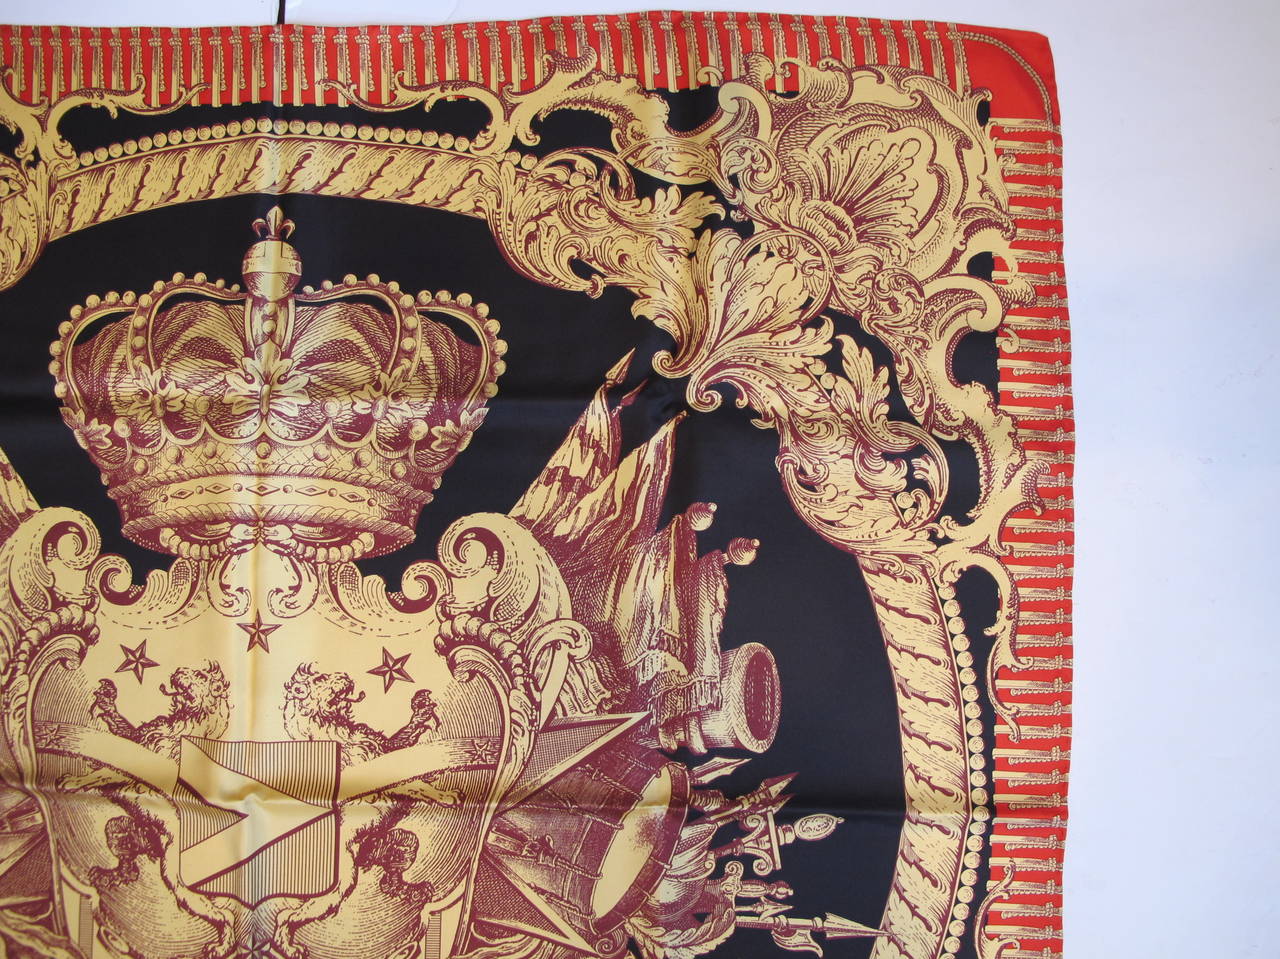 Gianfranco Ferre Majestic Crown Motif Silk Scarf In Excellent Condition For Sale In San Francisco, CA